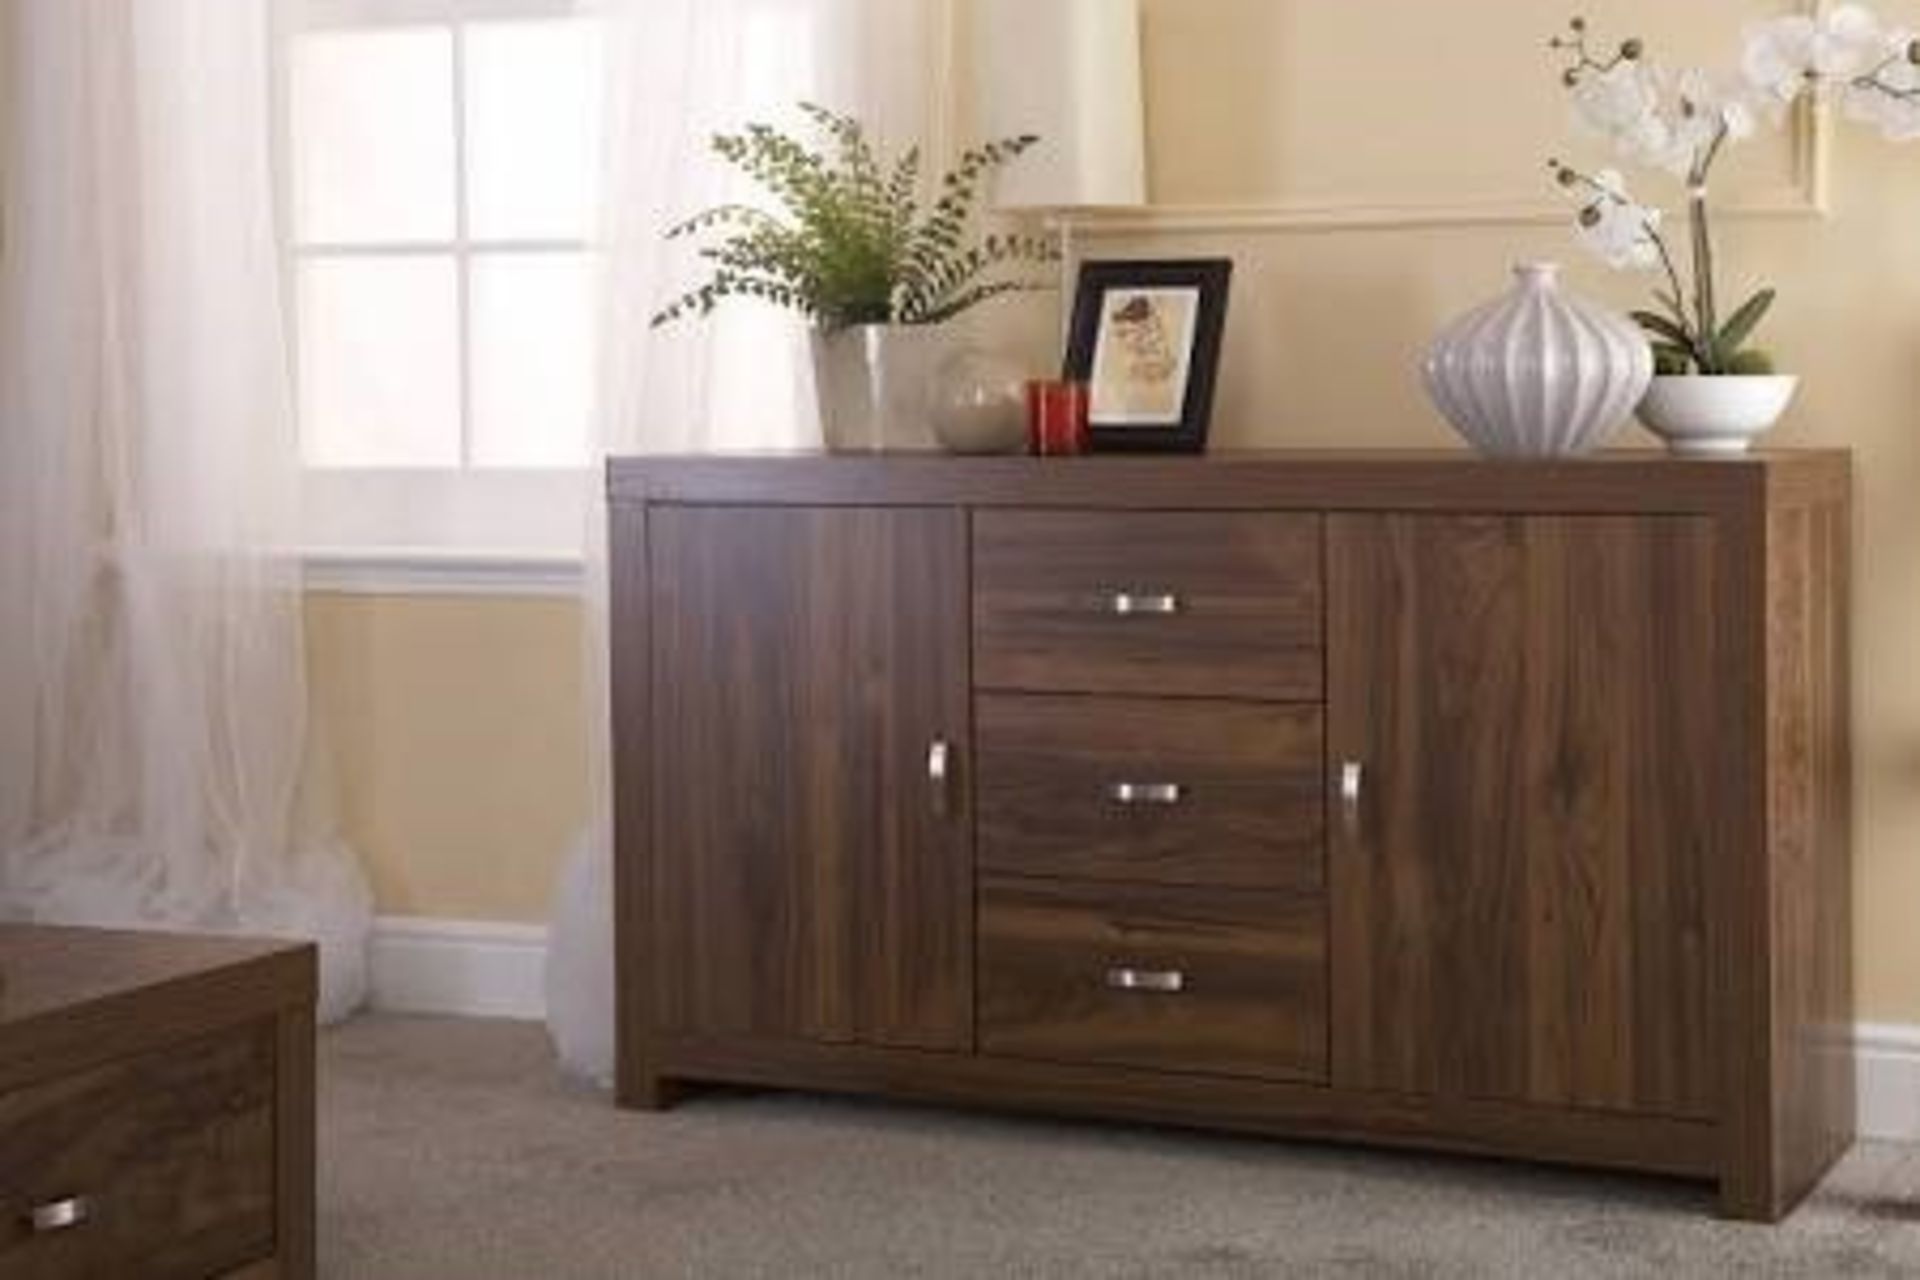 1 BOXED HAMPTON ACACIA SIDEBOARD IN DARK OAK / RRP £164.95 (VIEWING HIGHLY RECOMMENDED)